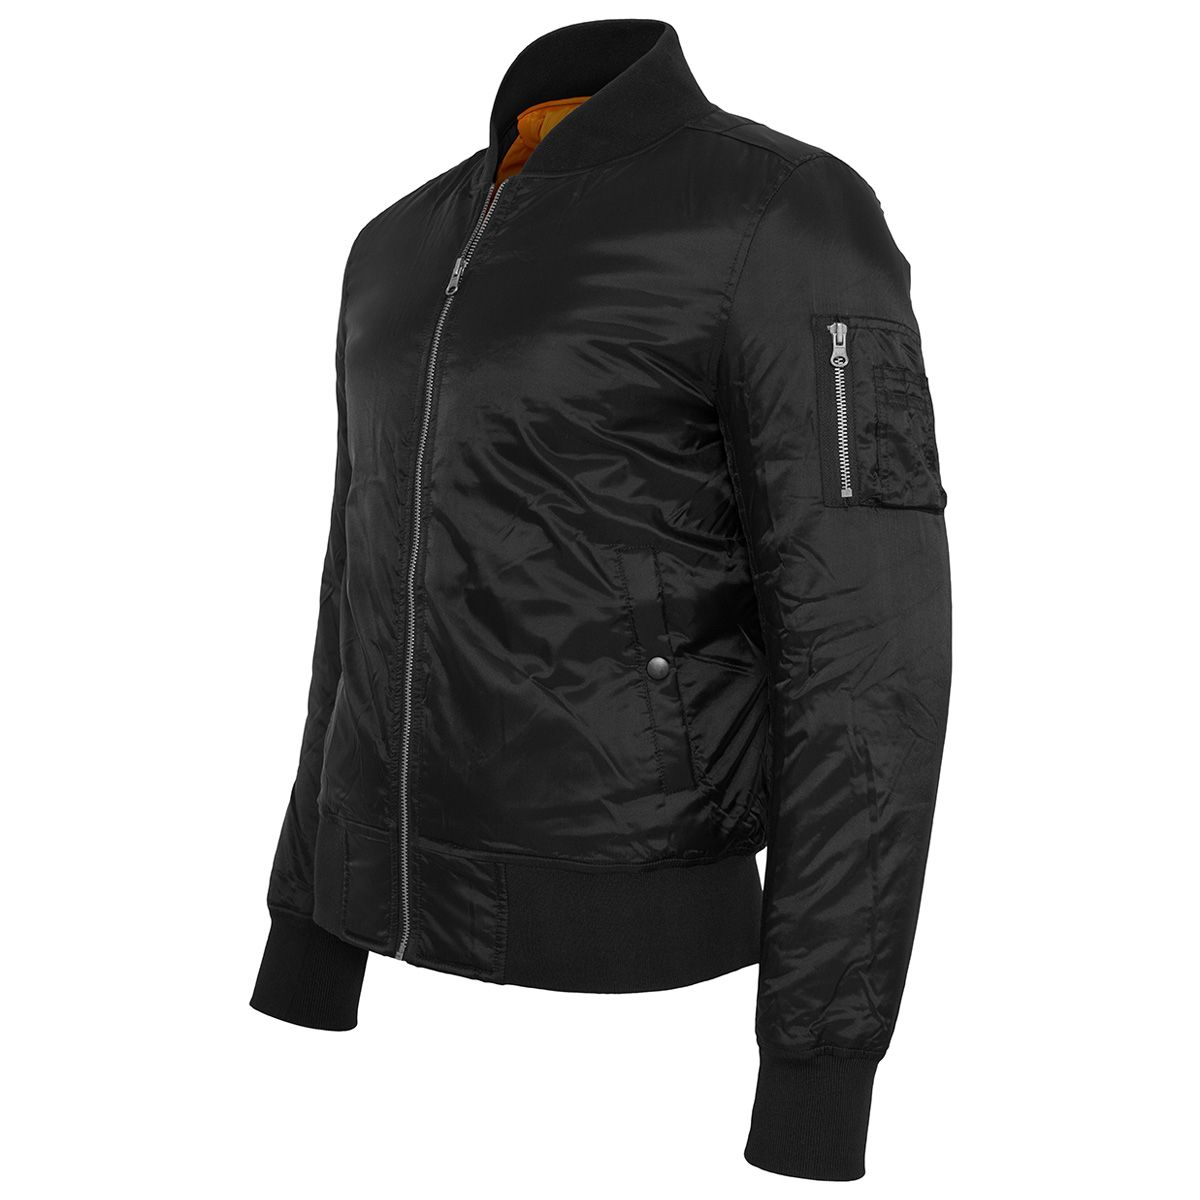 Parade ORTEGO - Blouson bombers homme - taille S